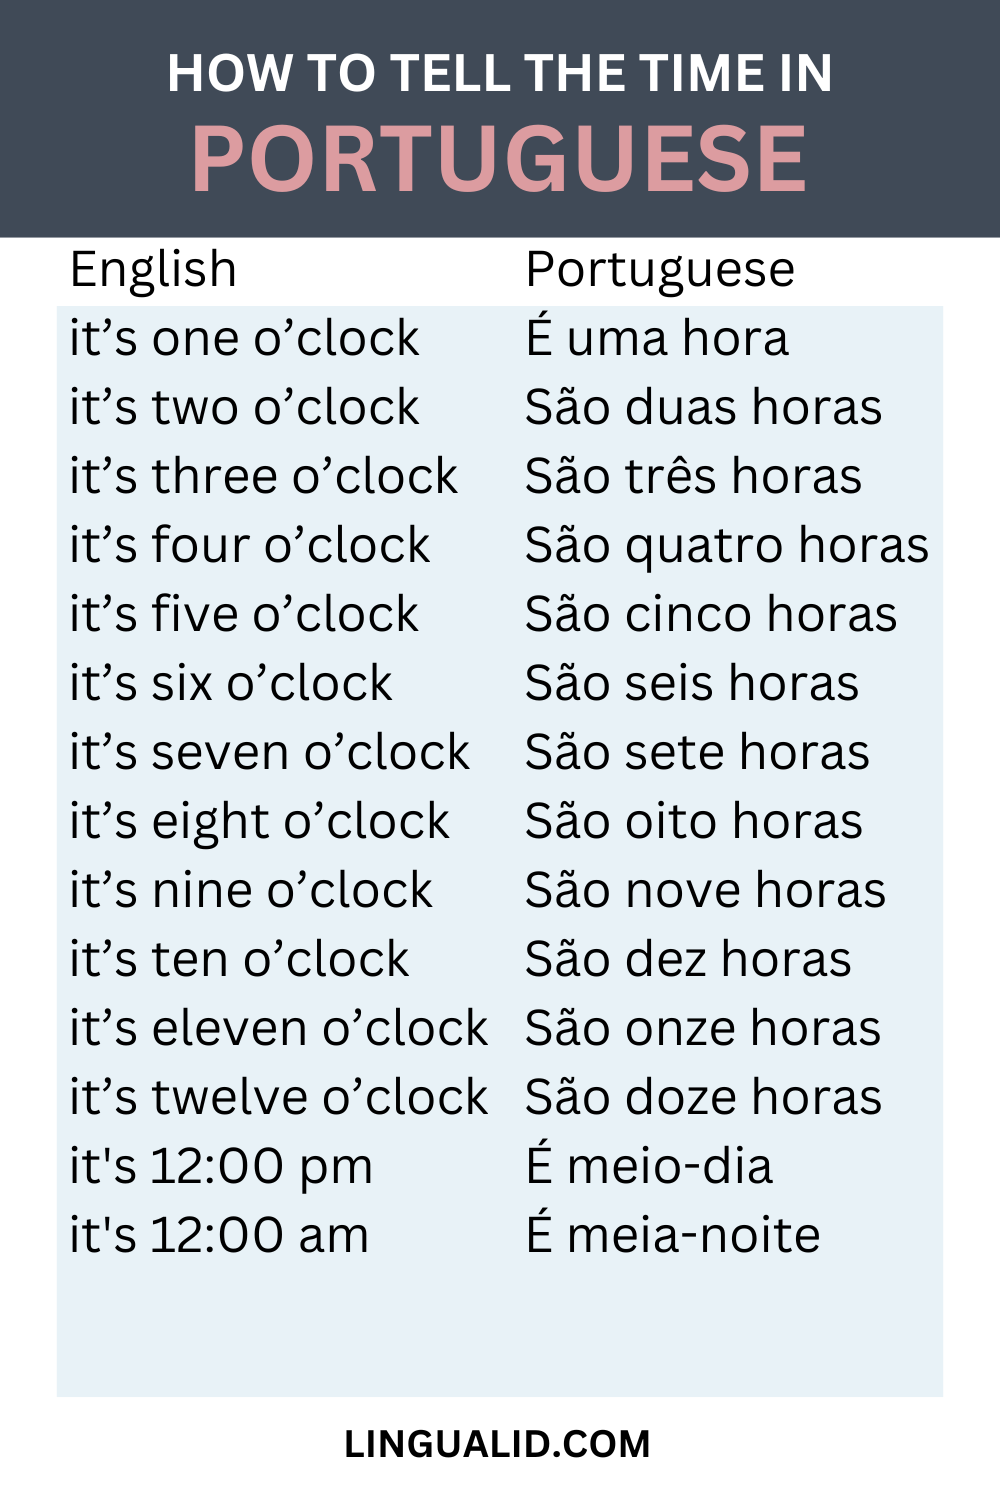 How To Tell The Time In Portuguese visual